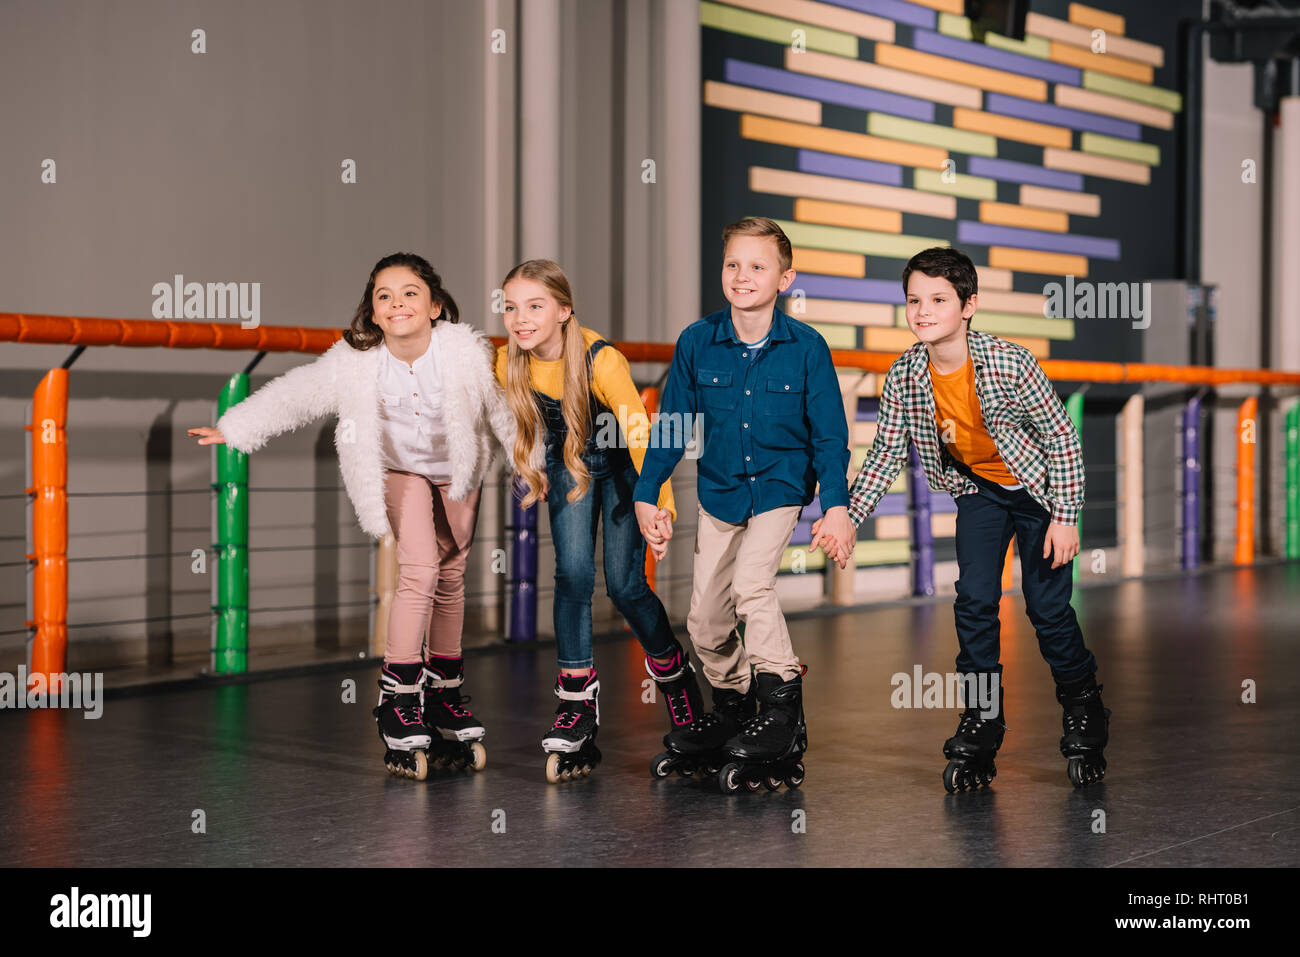 Four smiling kids holding hands while skating together Stock Photo